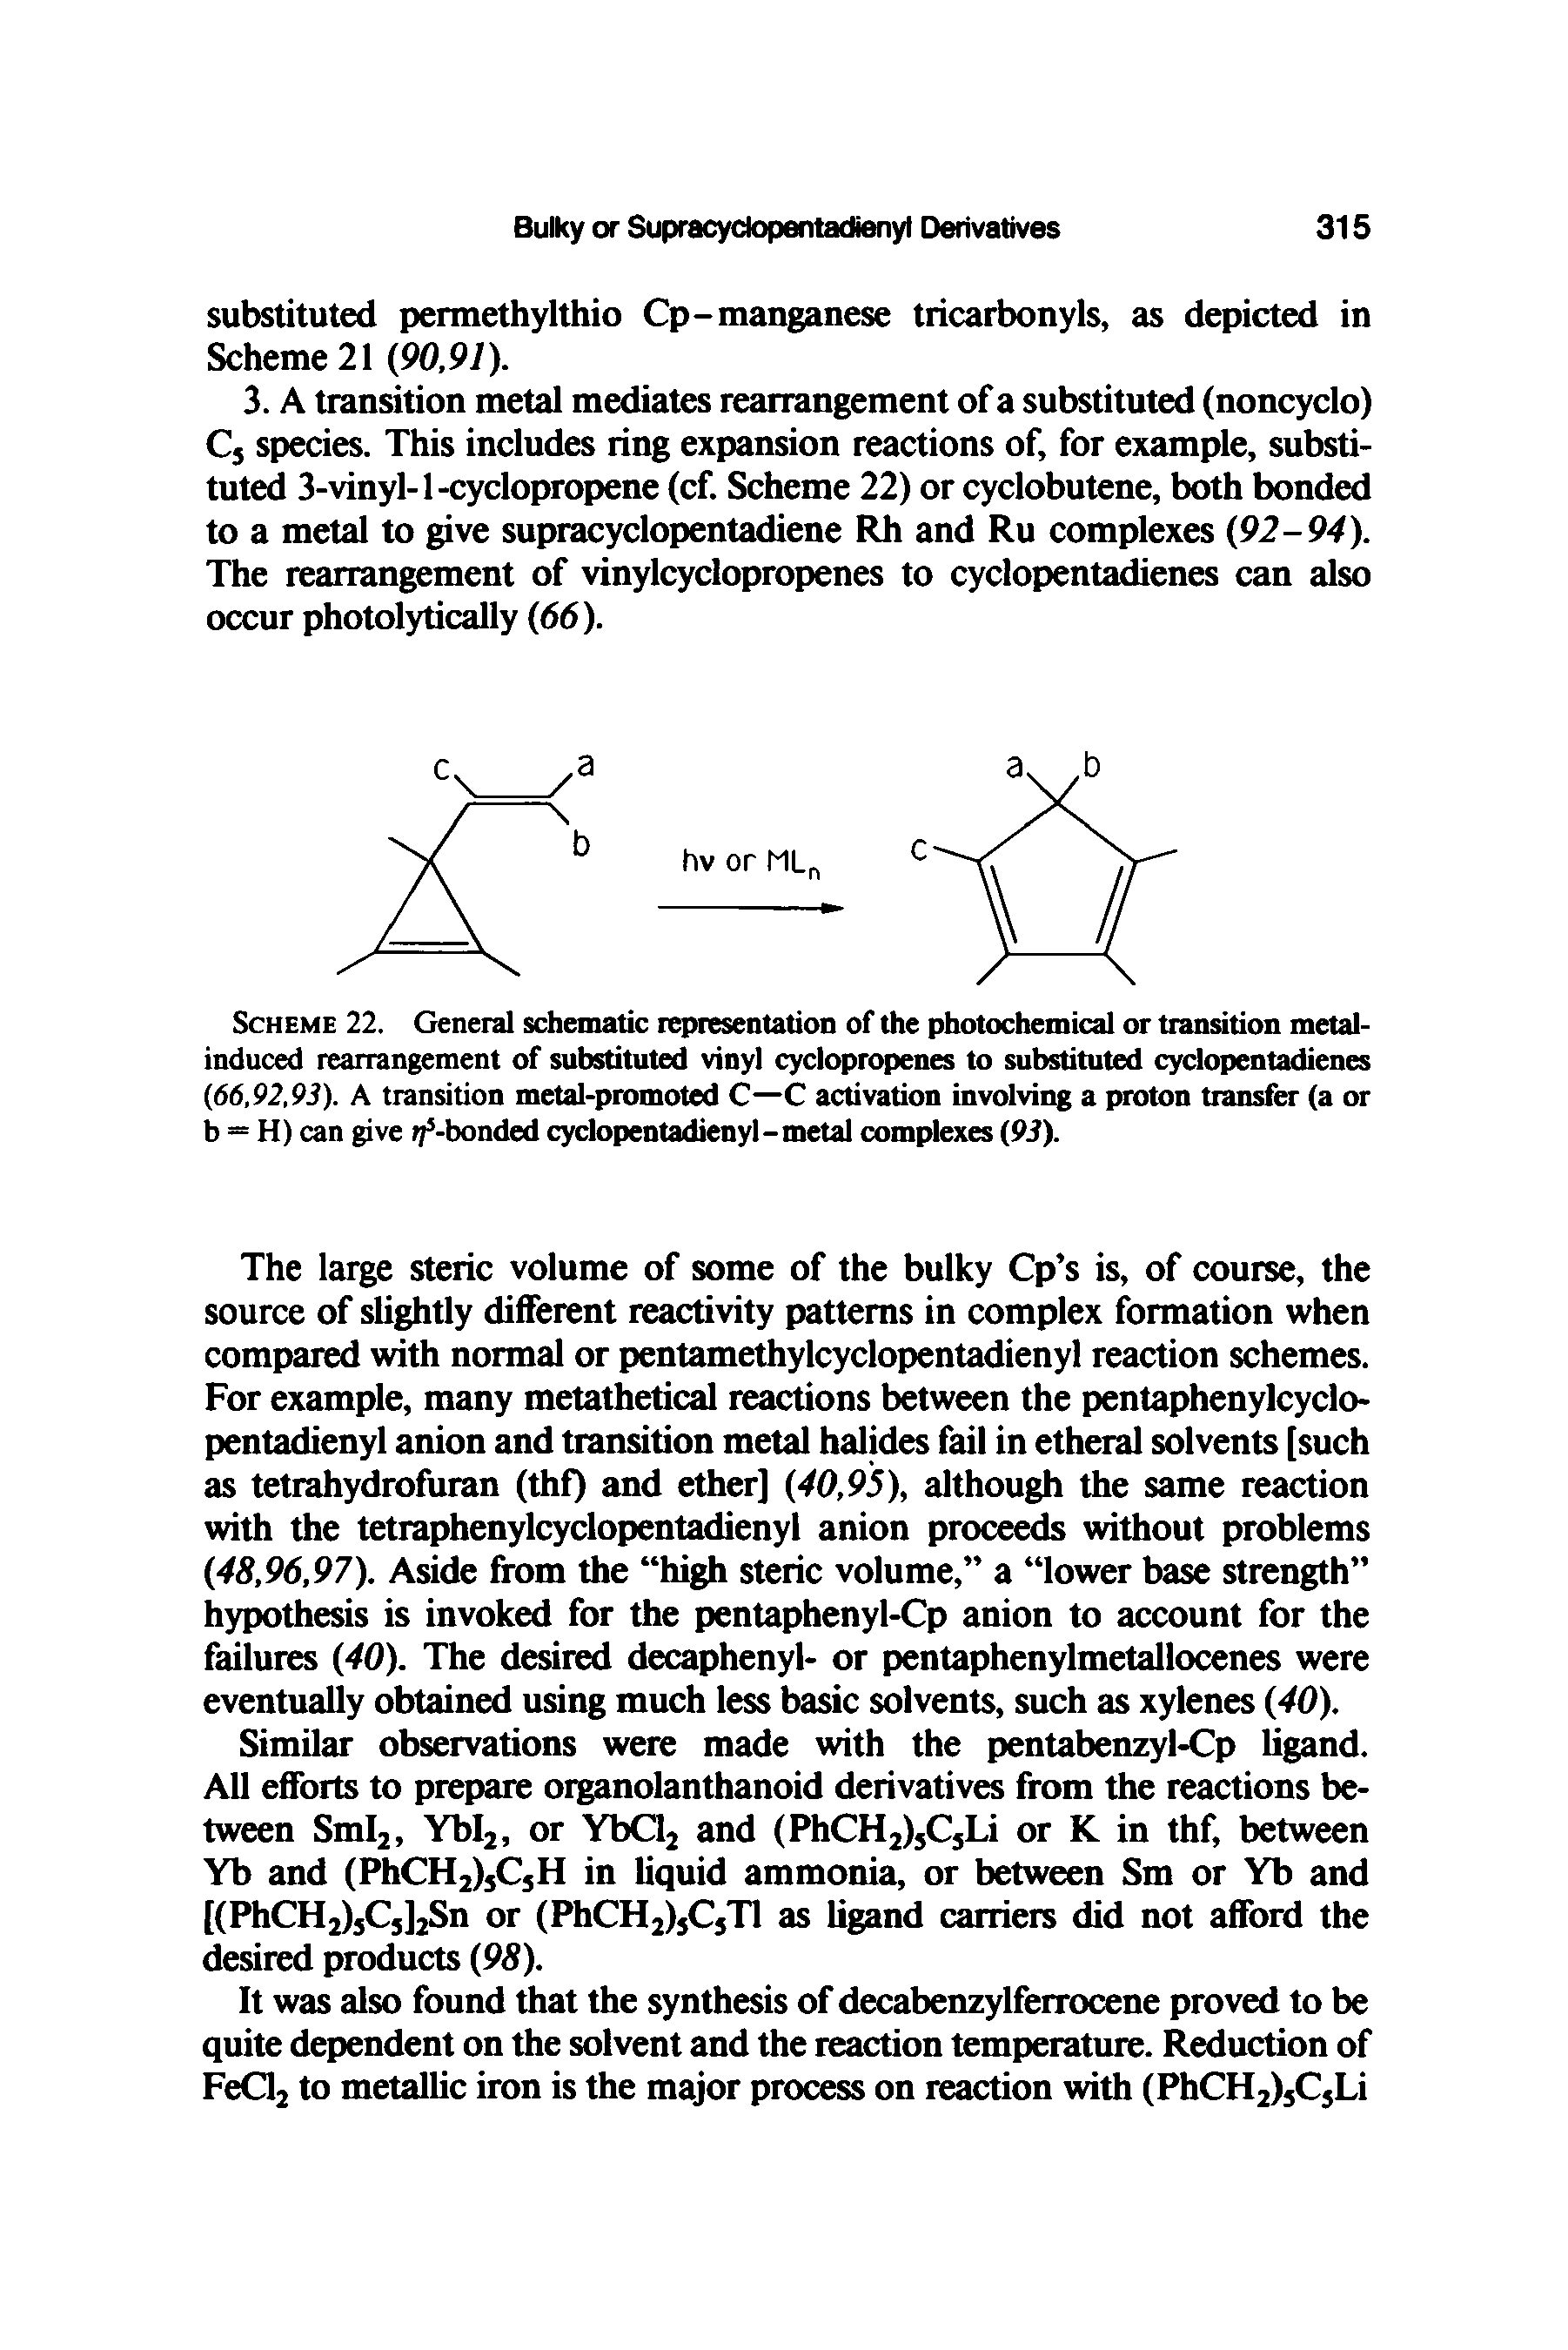 Scheme 22. General schematic representation of the photochemical or transition metal-induced rearrangement of substituted vinyl cyclopropenes to substituted cyclopentadienes (66,92,93). A transition metal-promoted C—C activation involving a proton transfer (a or b = H) can give -bonded cyclopentadienyI-metal complexes (93).